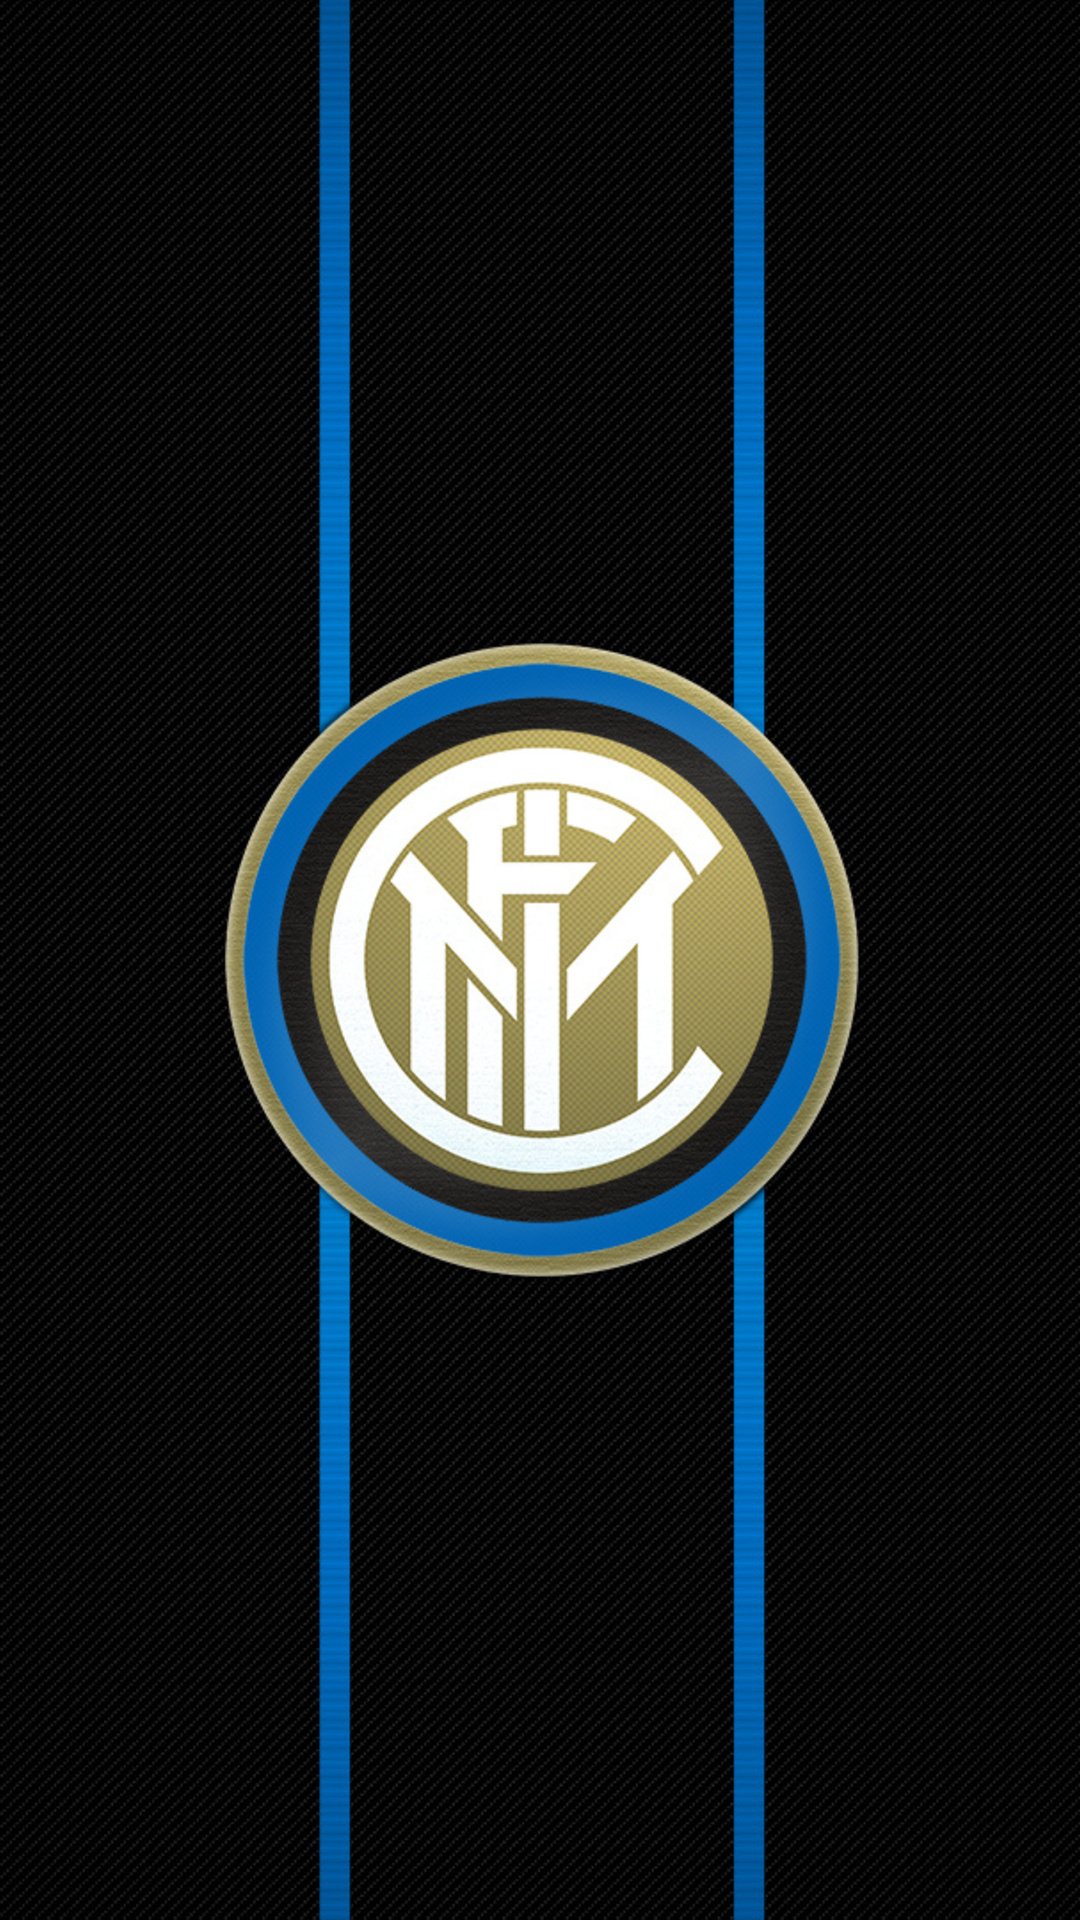 Inter: A professional football club based in Milan, Italy. 1080x1920 Full HD Background.